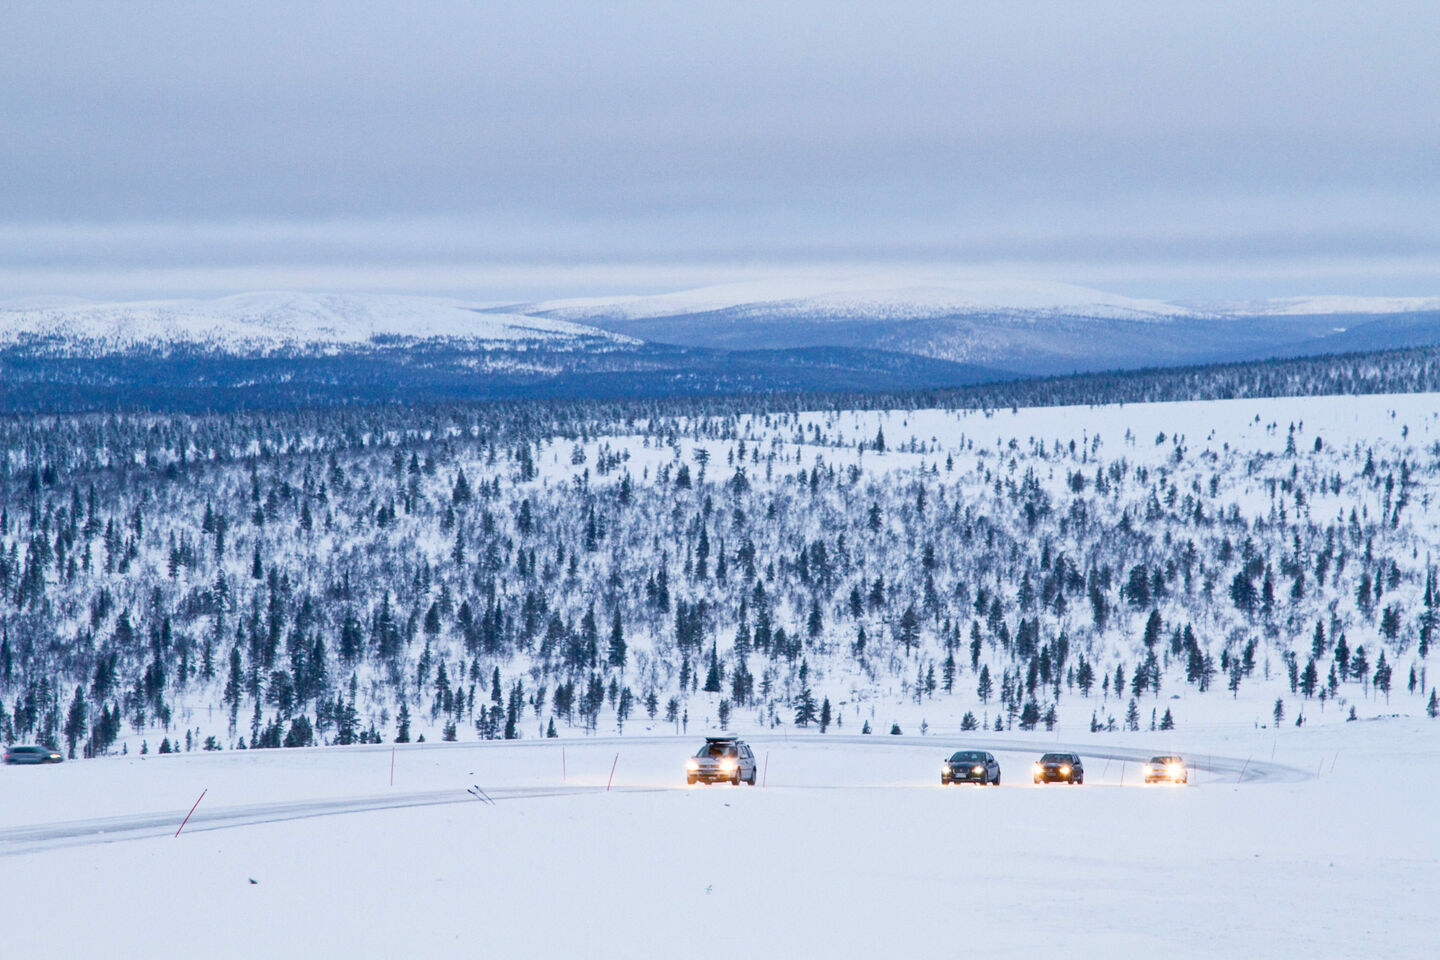 Roads & bridges in Inari, accessible all-winter long, a feature of Finnish Lapland filming locations